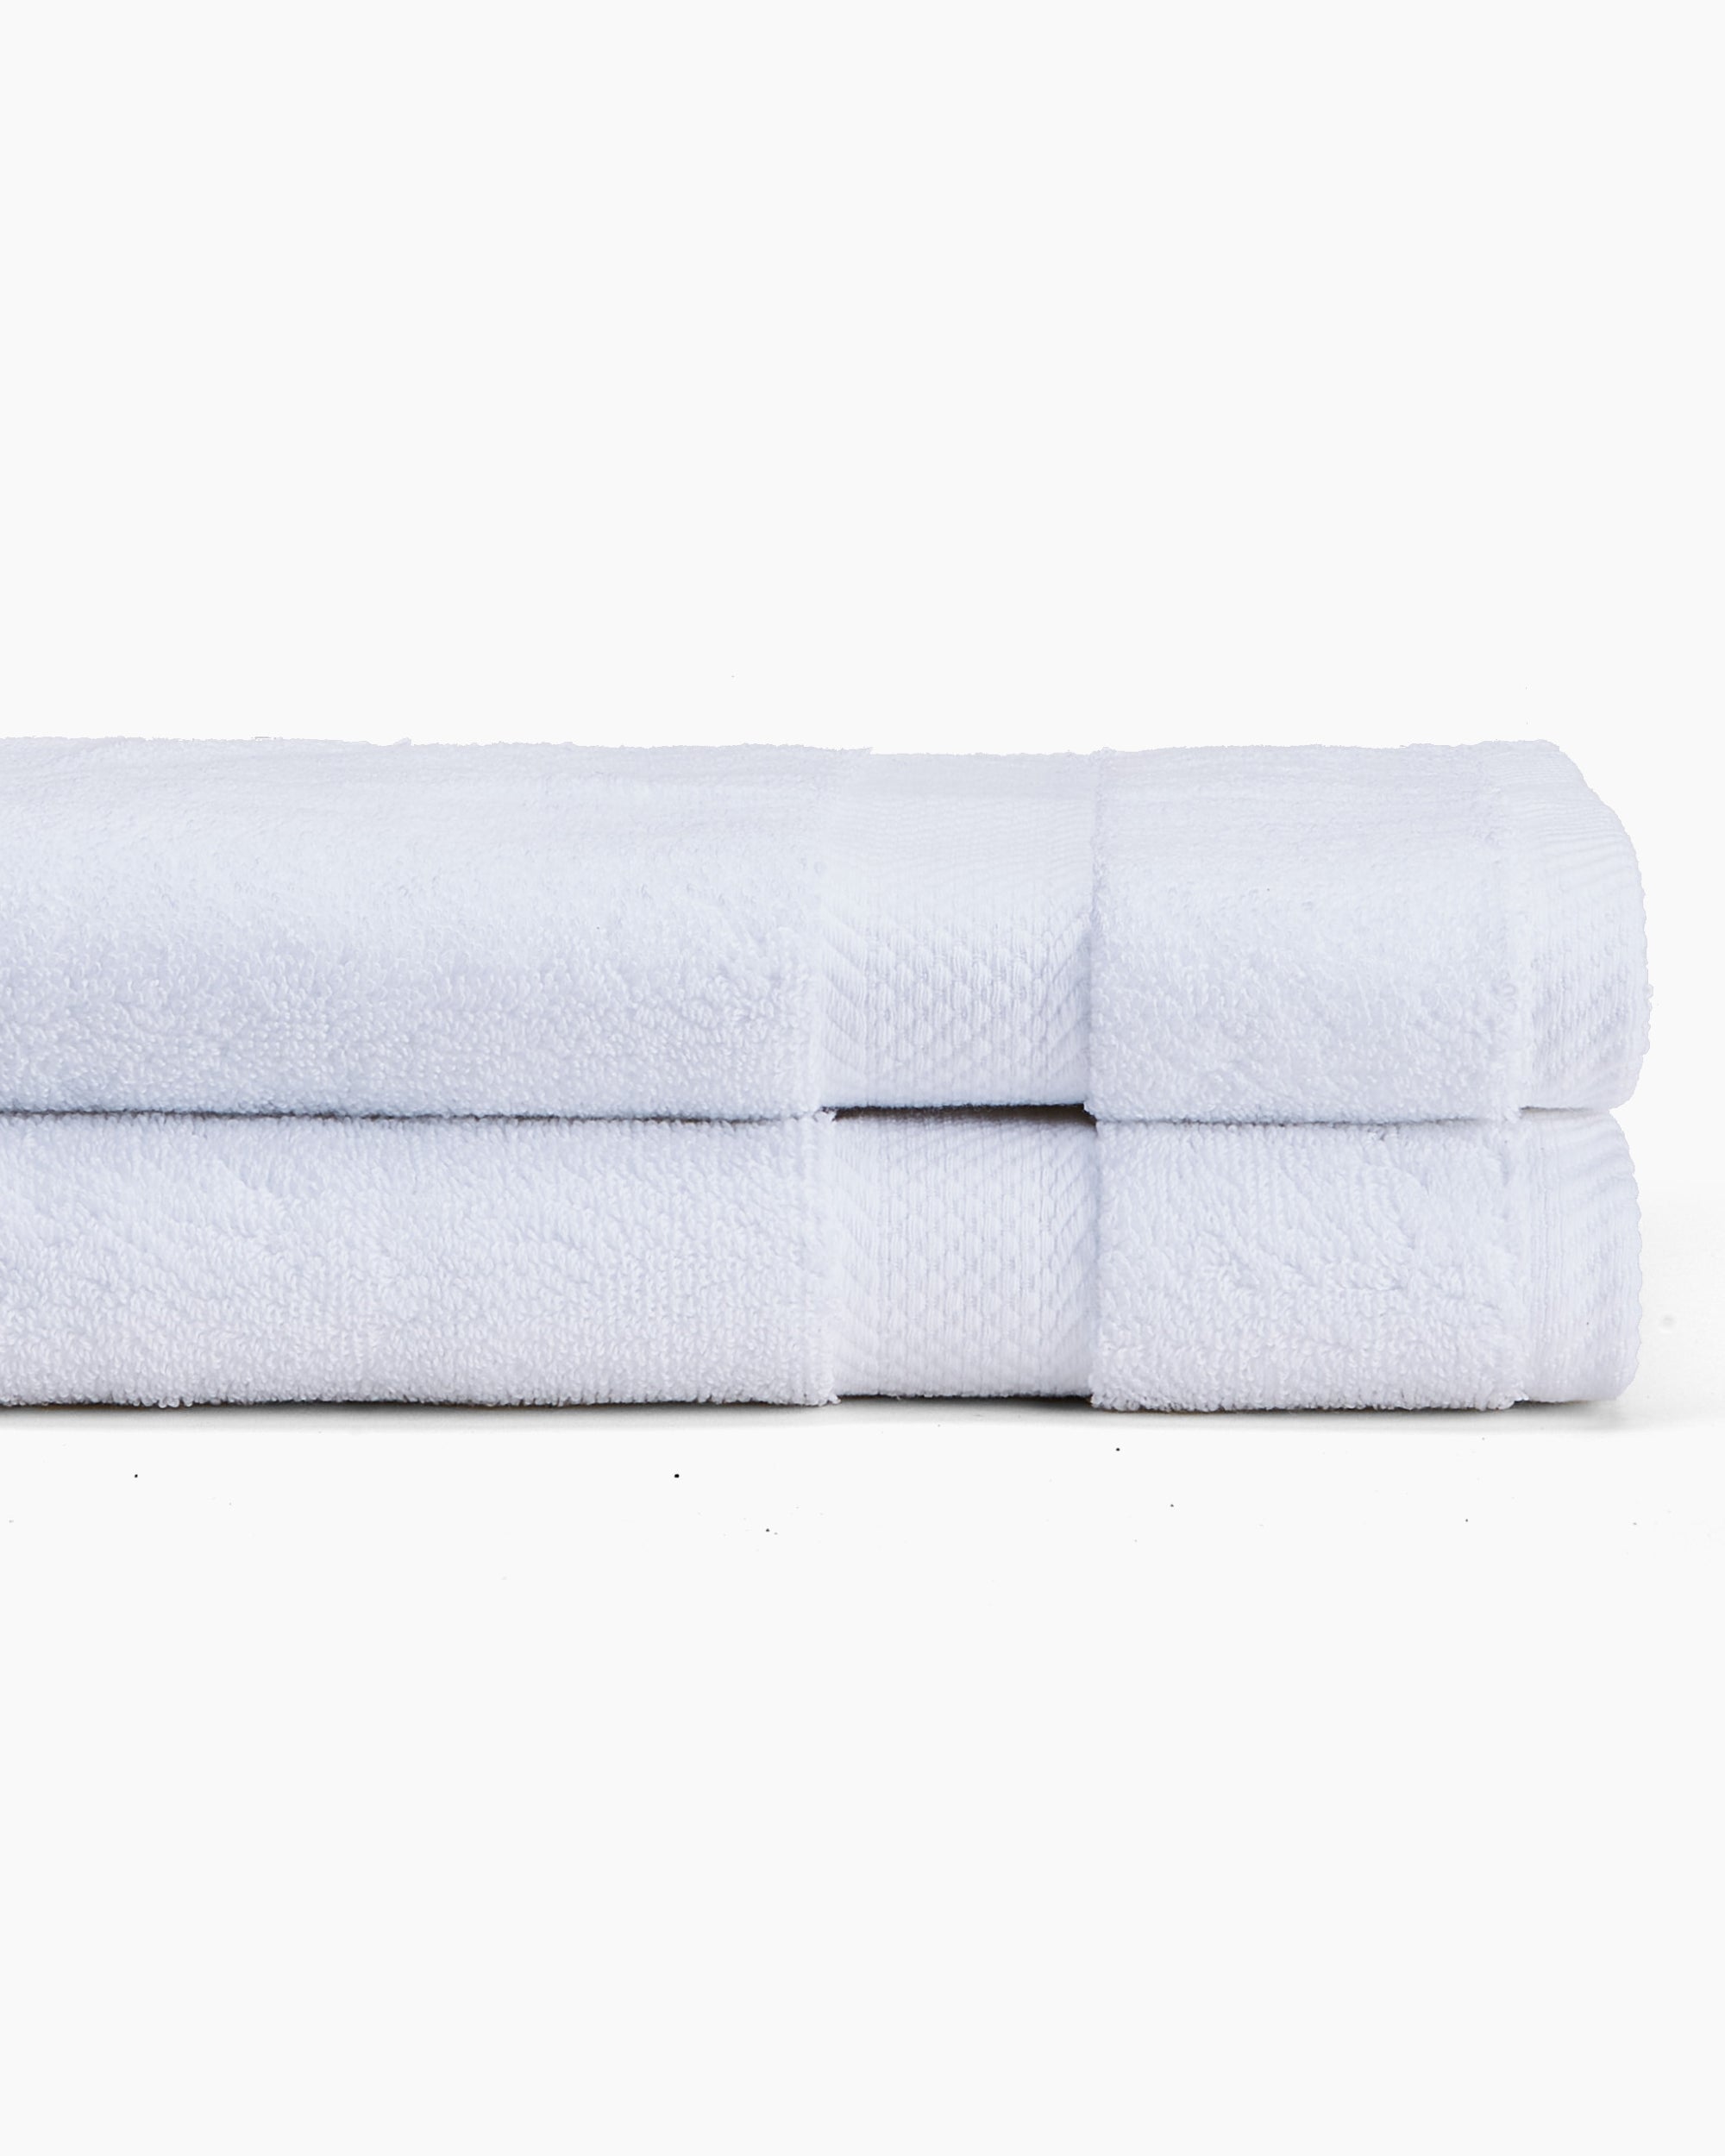 15 Best Bath Towels For Soft & Sumptuous Drying In 2023